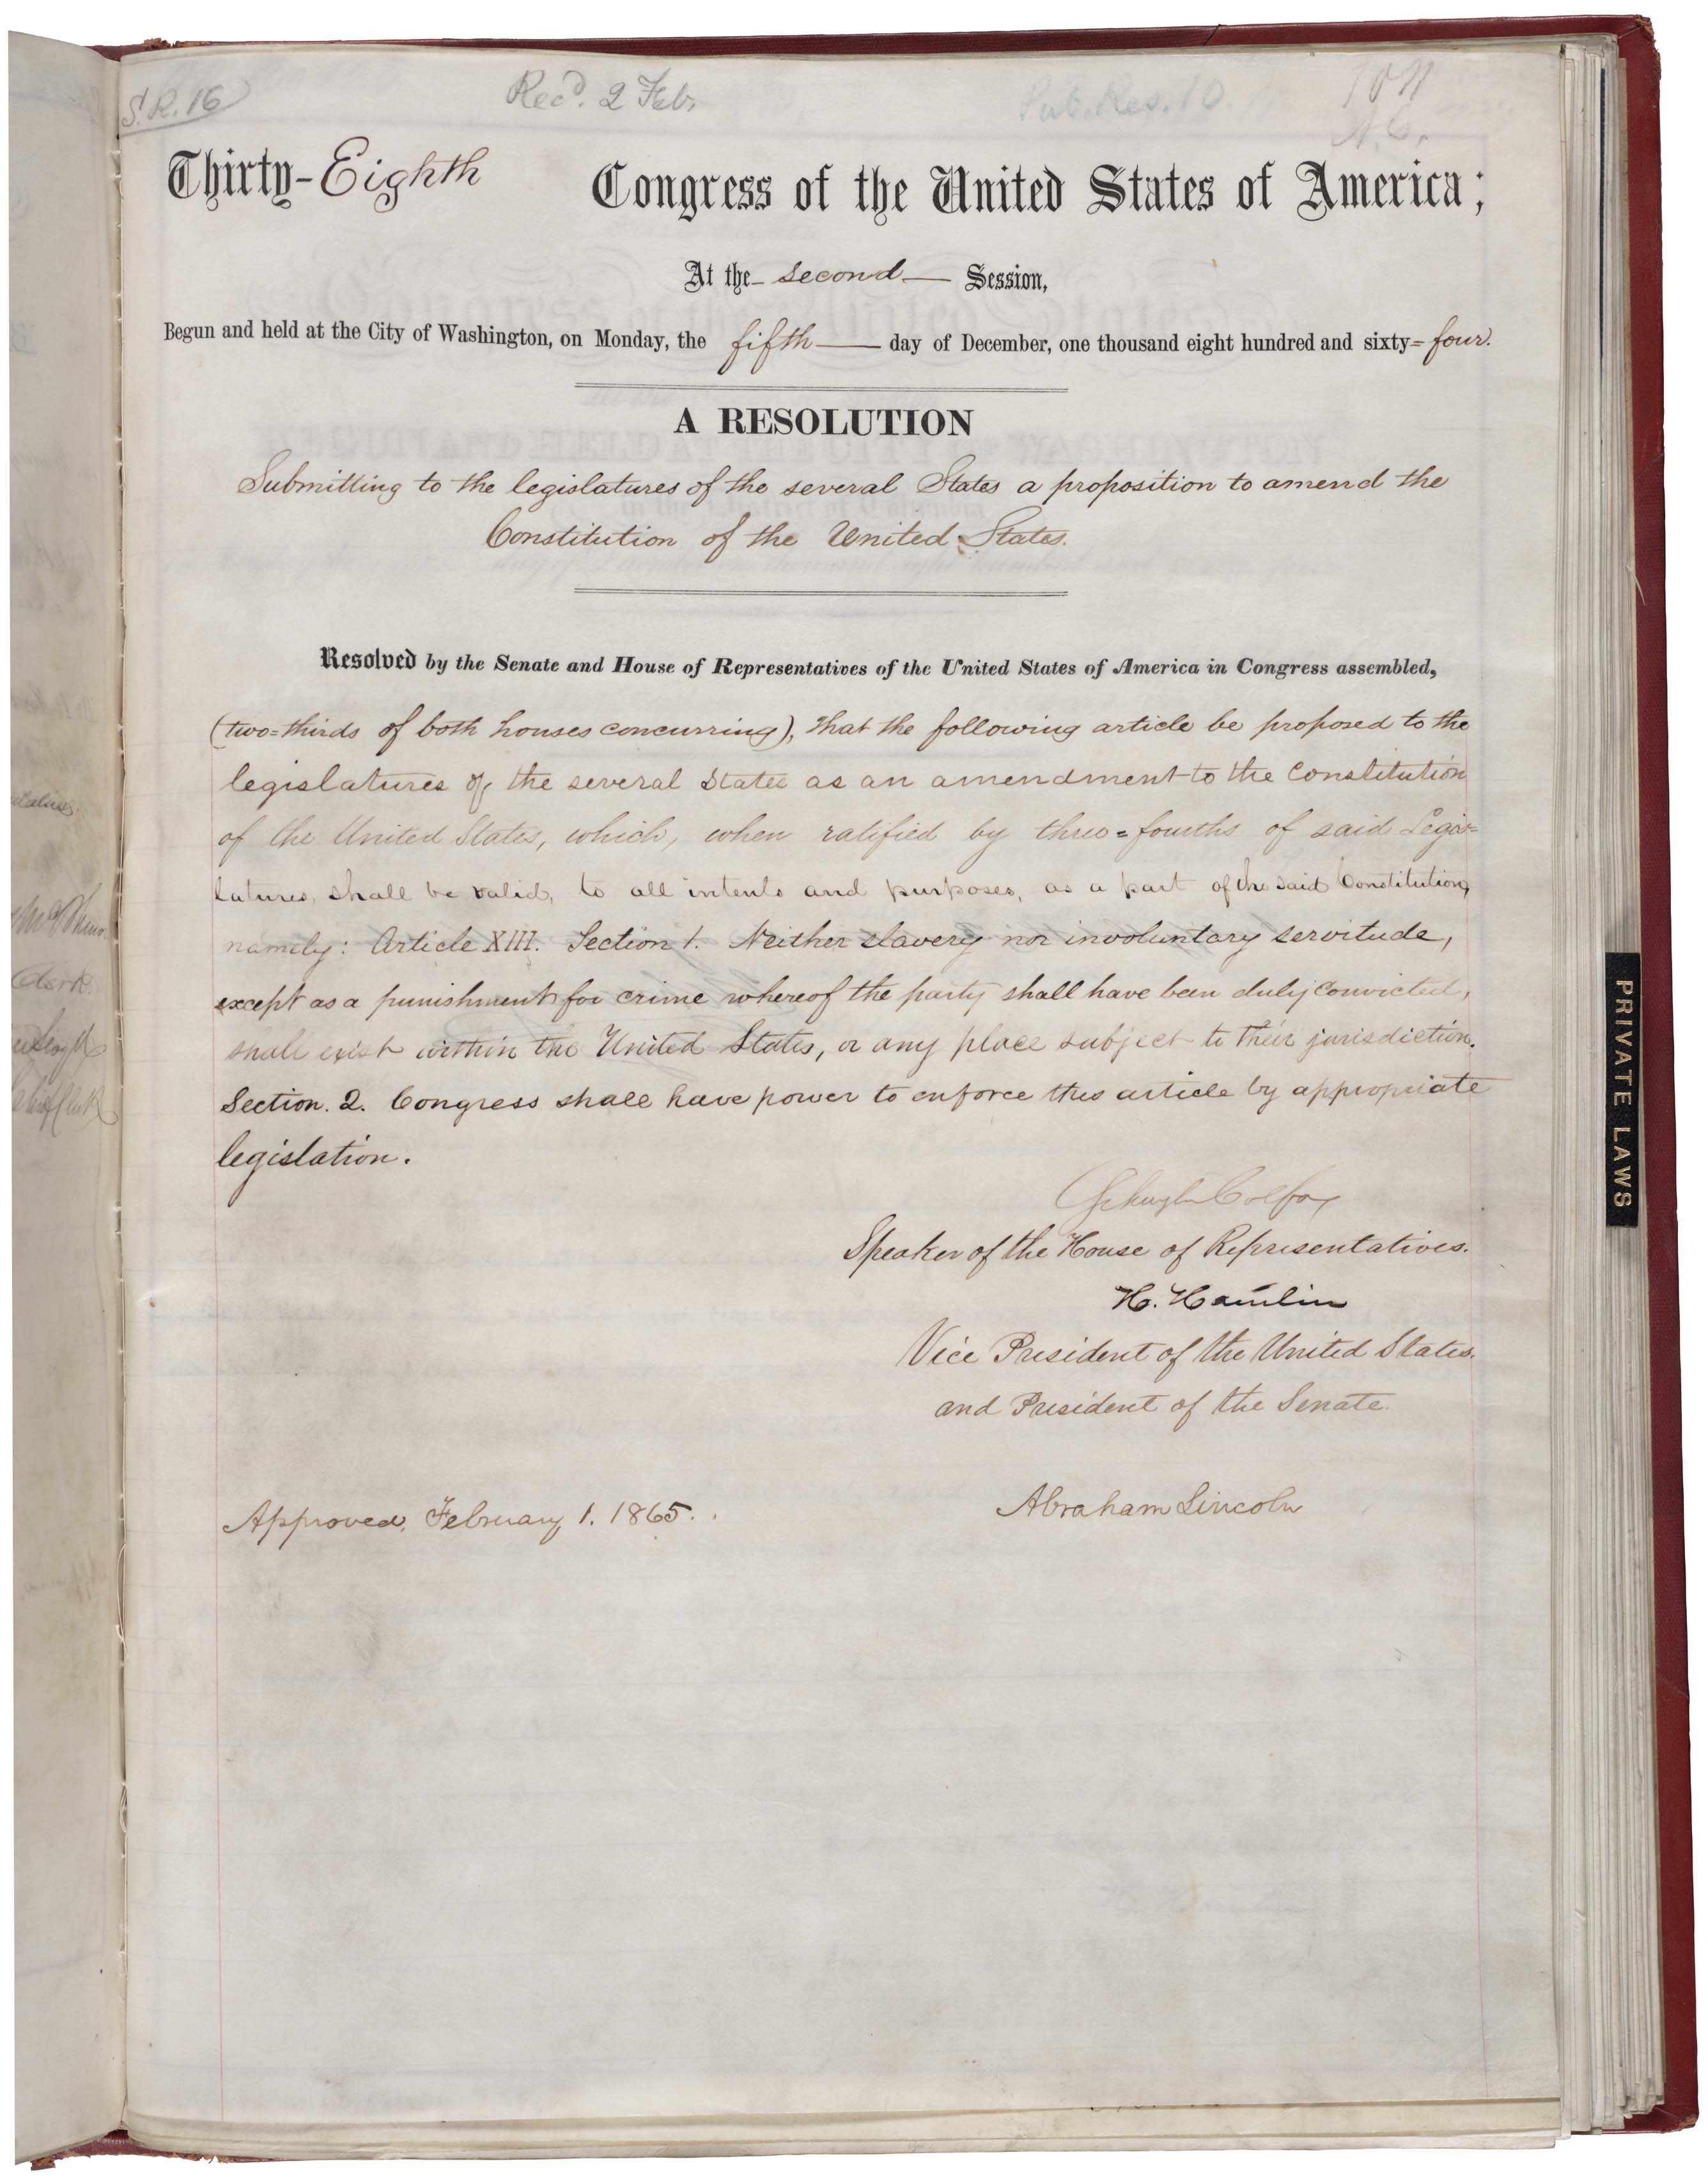 13th Amendment to the US Constitution